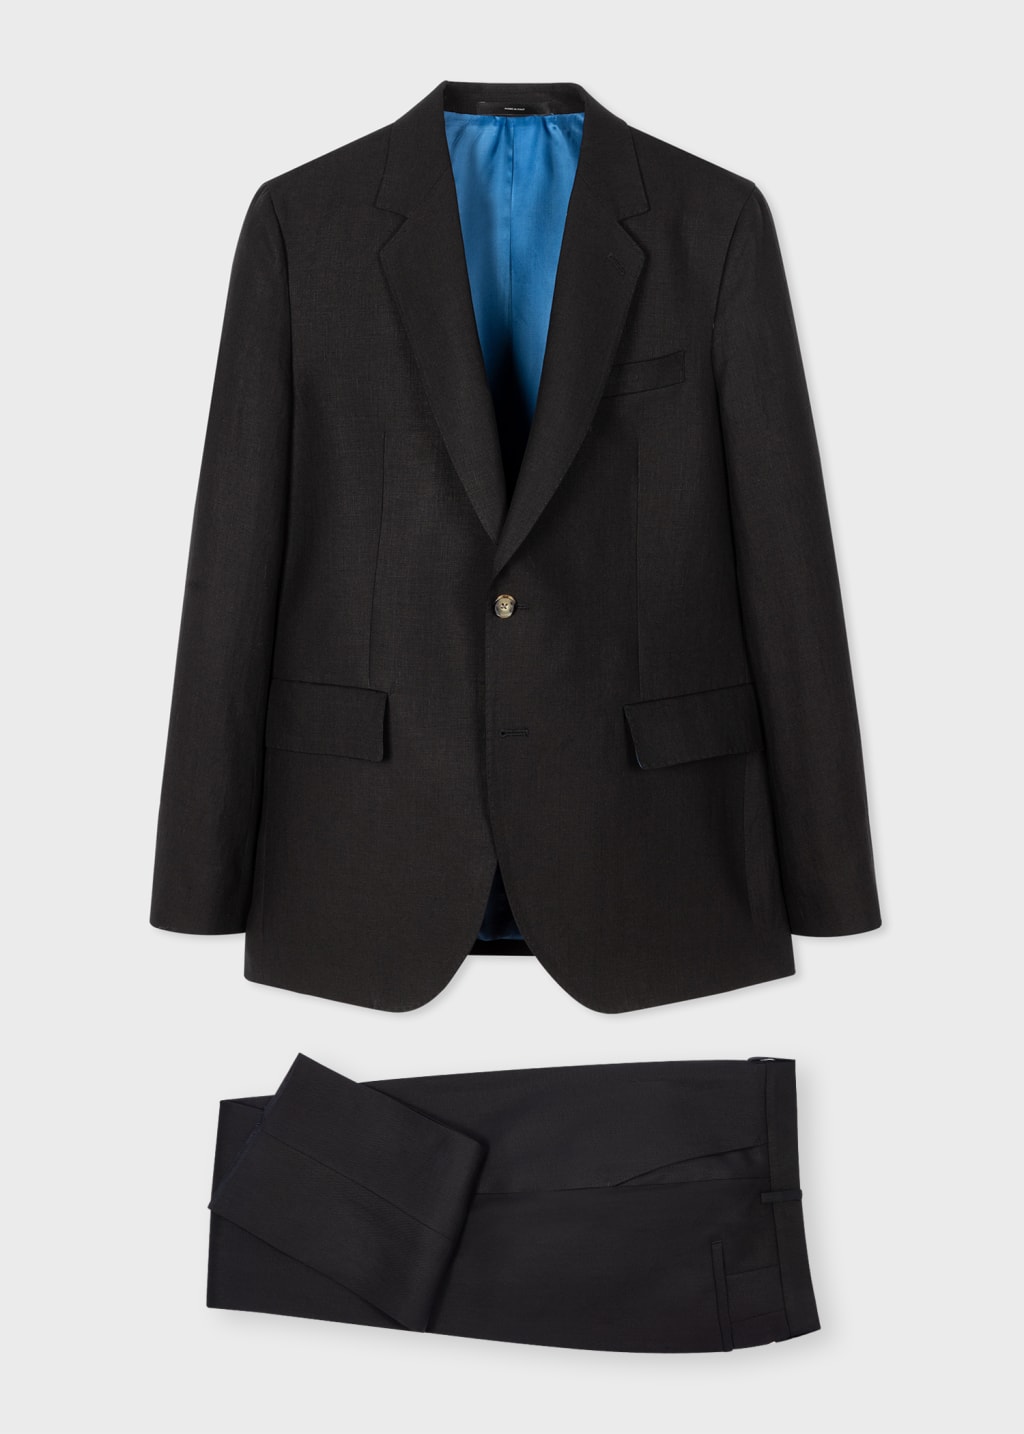 Product View - Black Linen Suit by Paul Smith